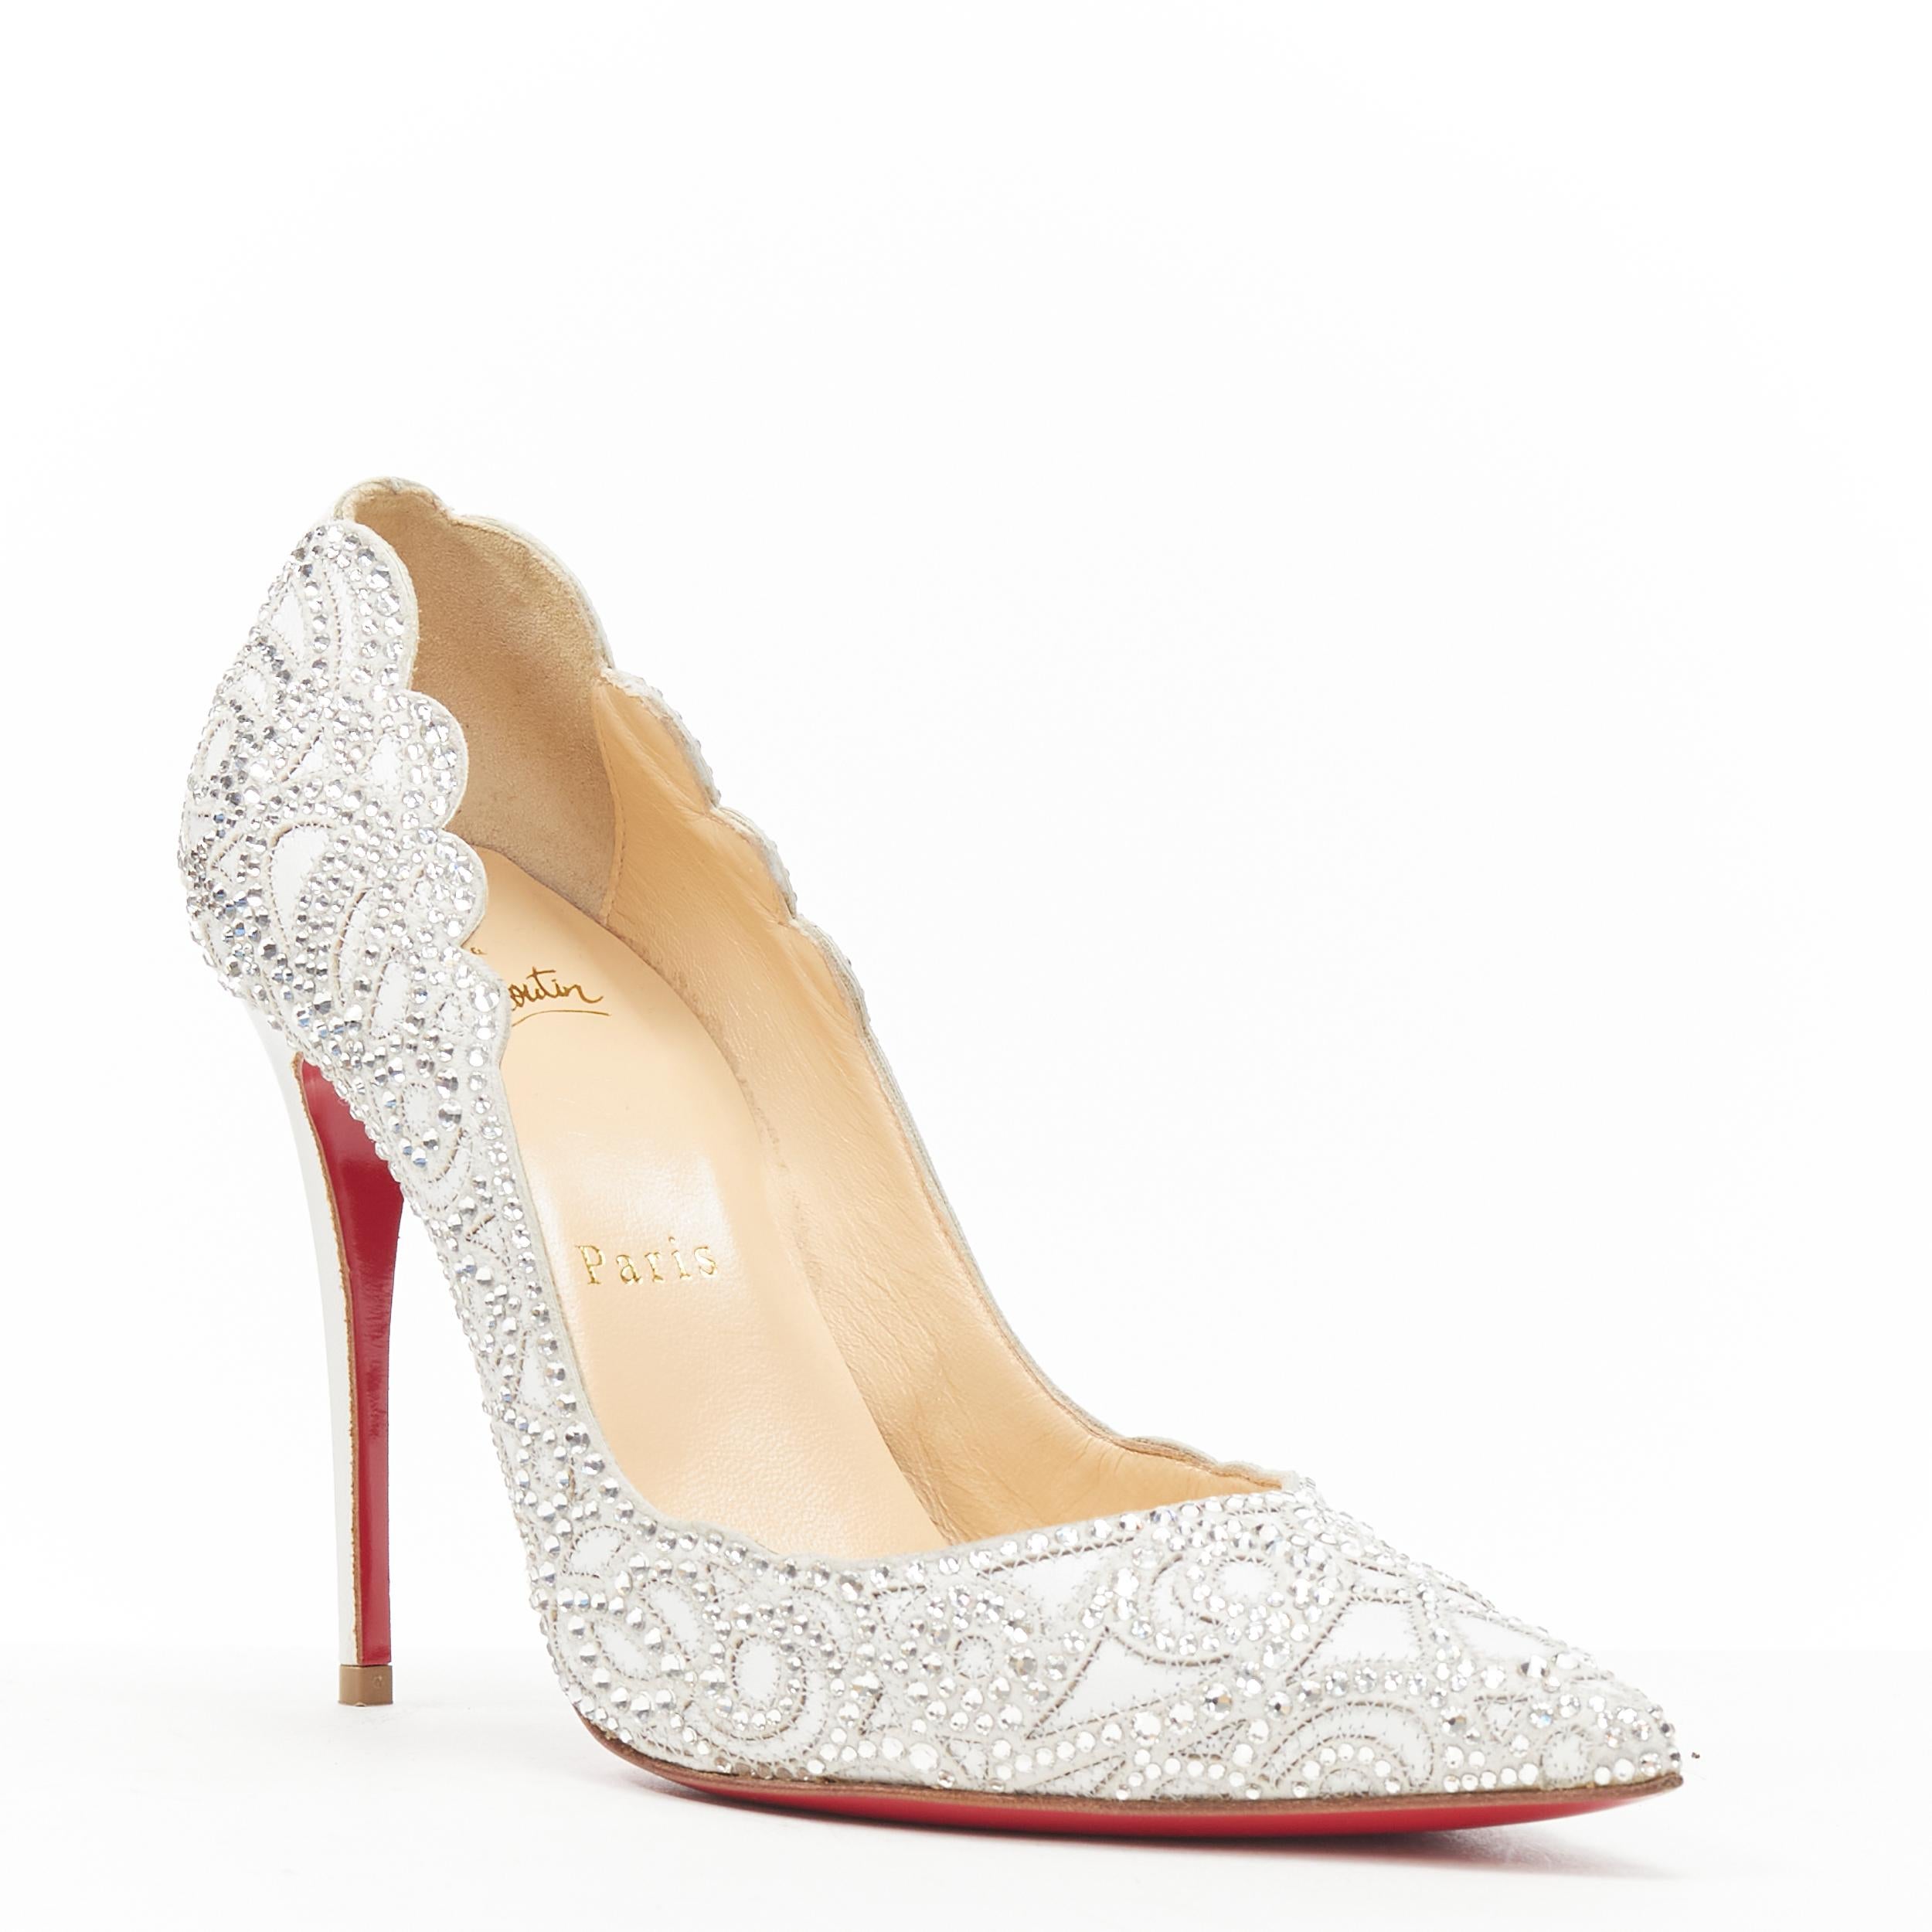 CHRISTIA LOUBOUTIN Top Vogue white strass crystal bridal pump EU37 
Reference: TGAS/B01137 
Brand: Christian Louboutin 
Designer: Christian Louboutin 
Model: Top Vague strass pump 
Material: Leather 
Color: White 
Pattern: Solid 
Extra Detail: Top